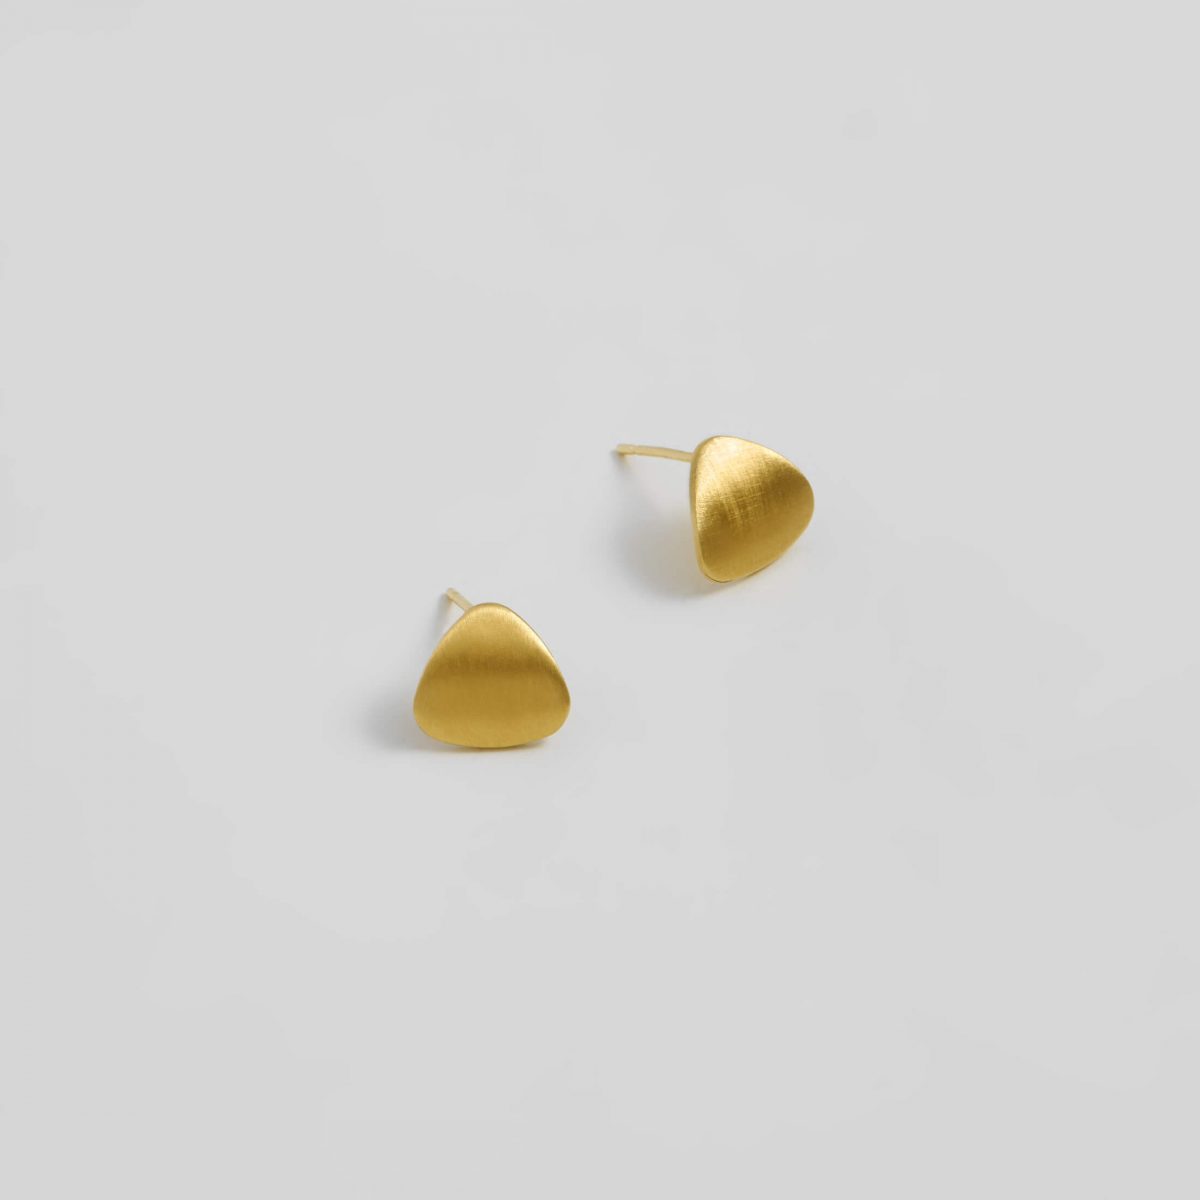 Dream A Little Dream Gold Stud Earrings by Xoutou's